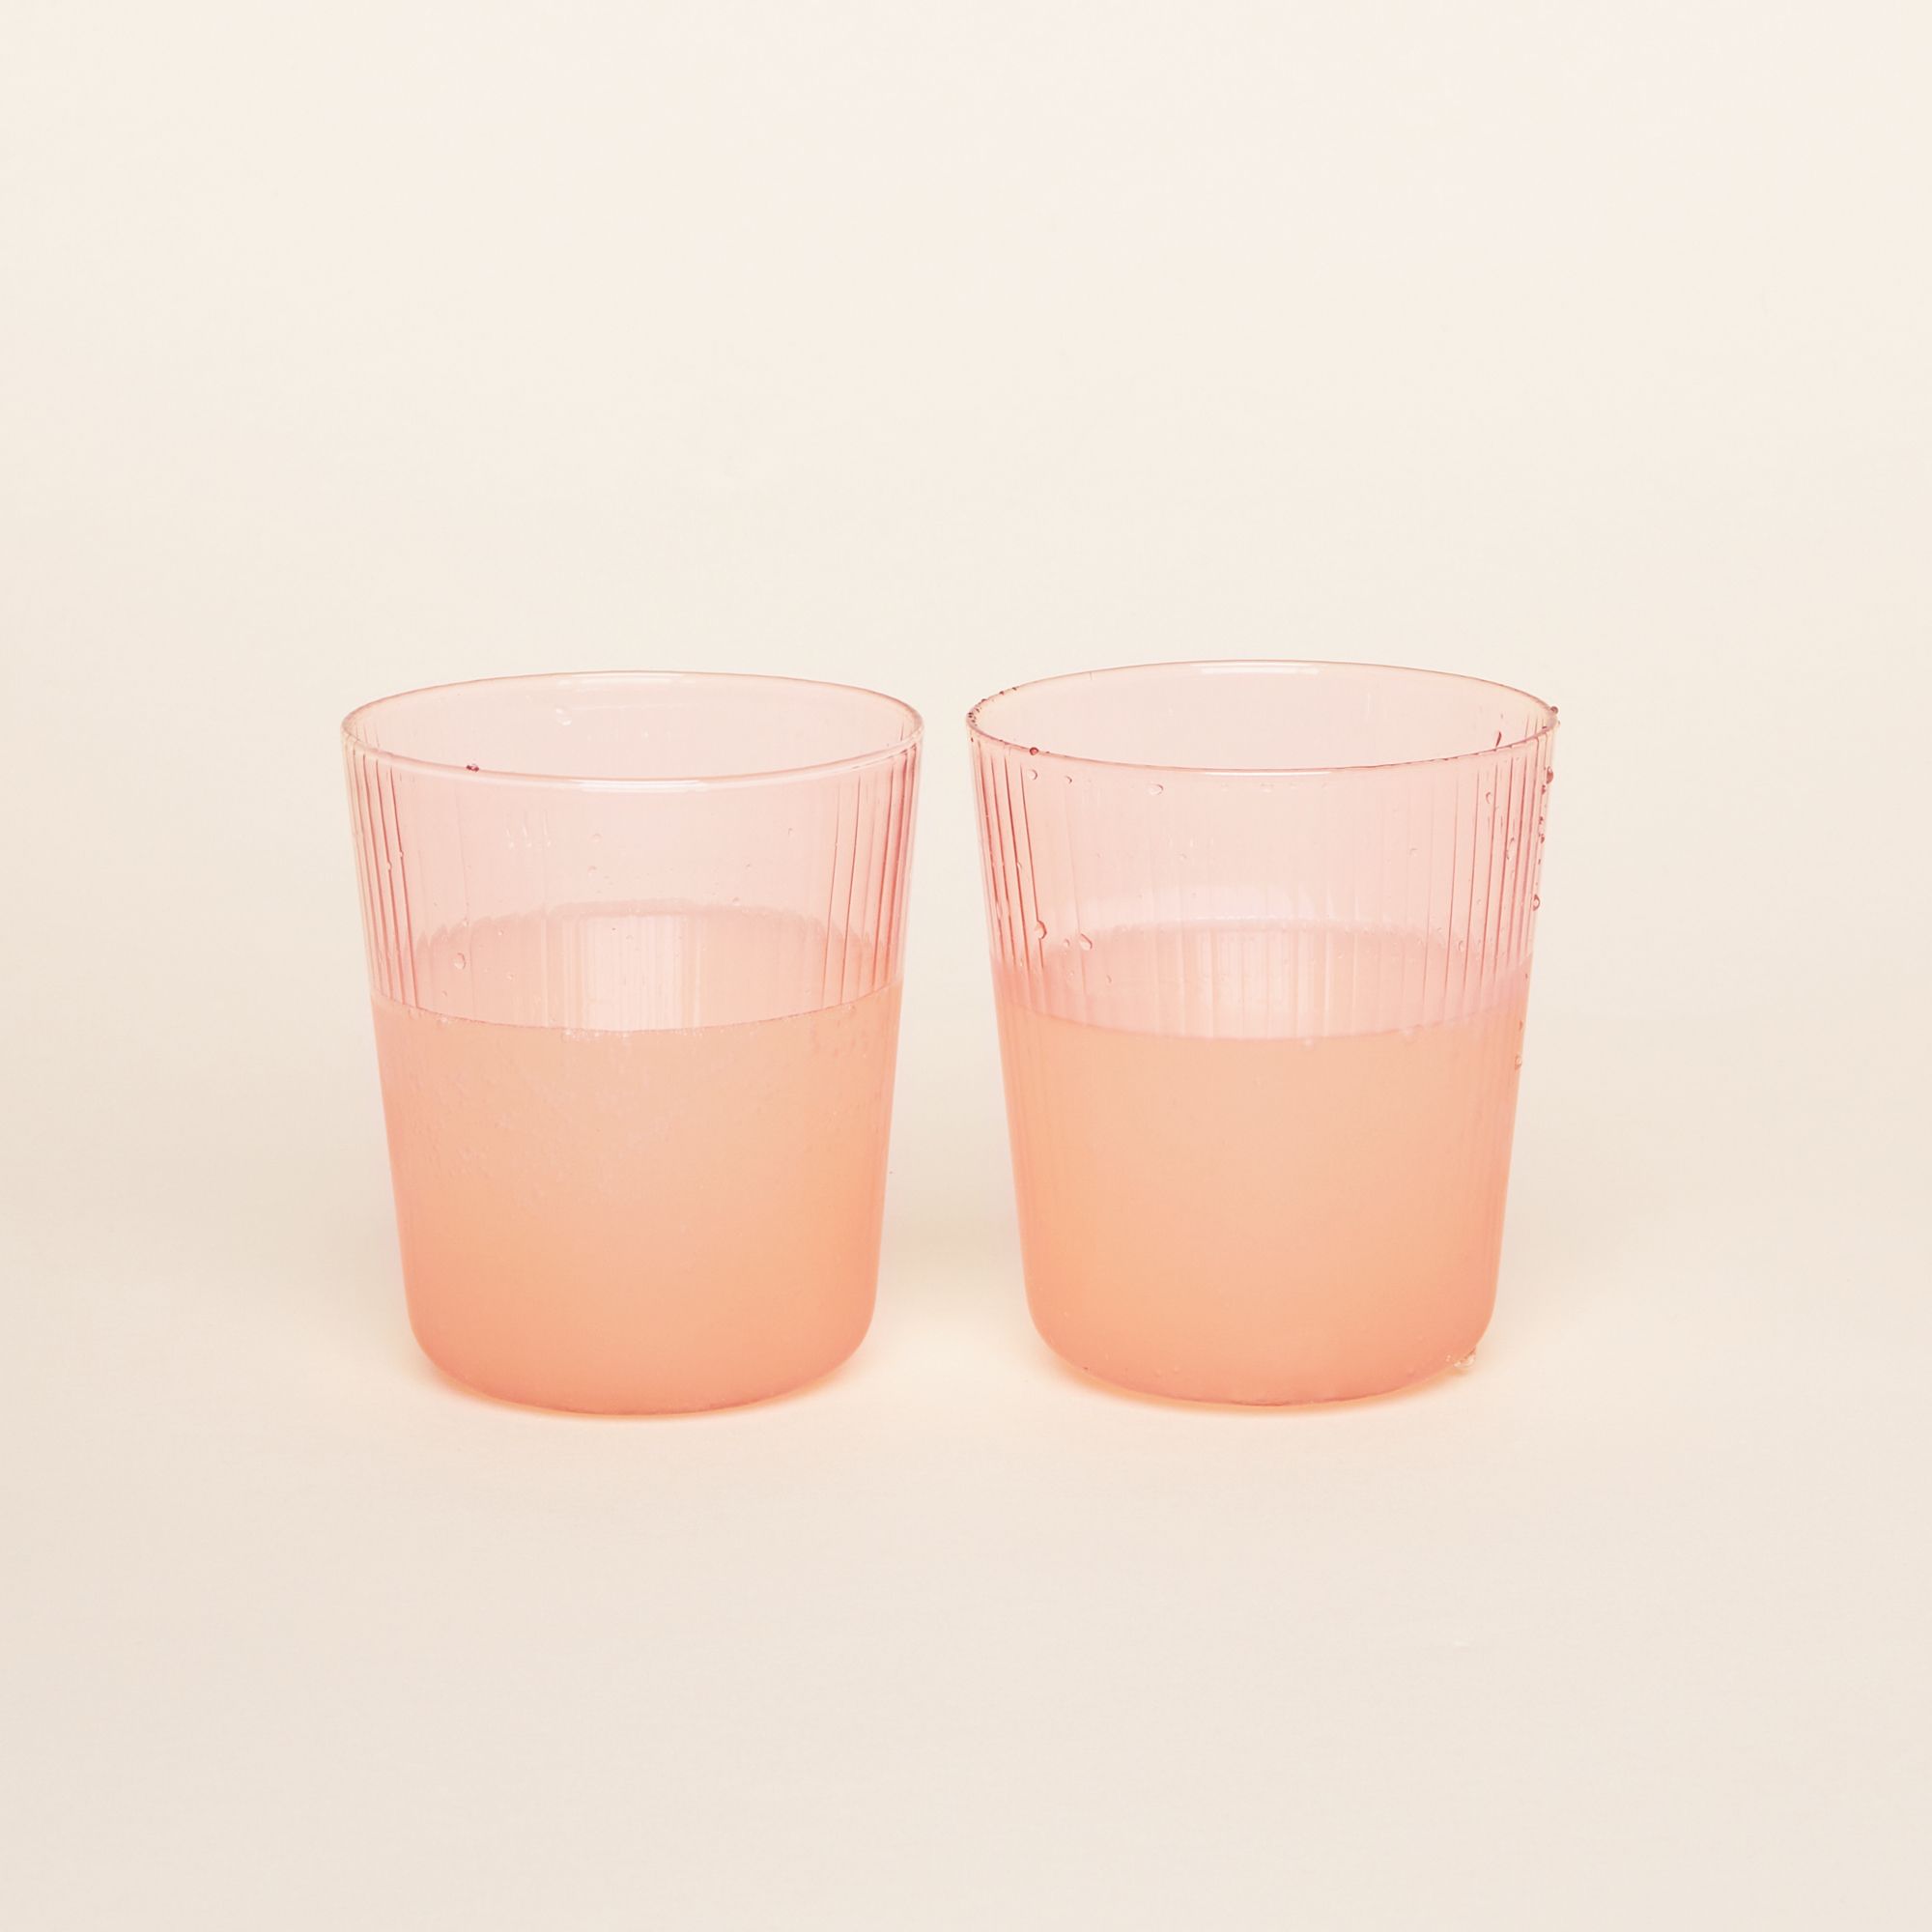 Water glasses that come in three pale, translucent color glasses: yellow, green, pink. The cups have vertical grooves.